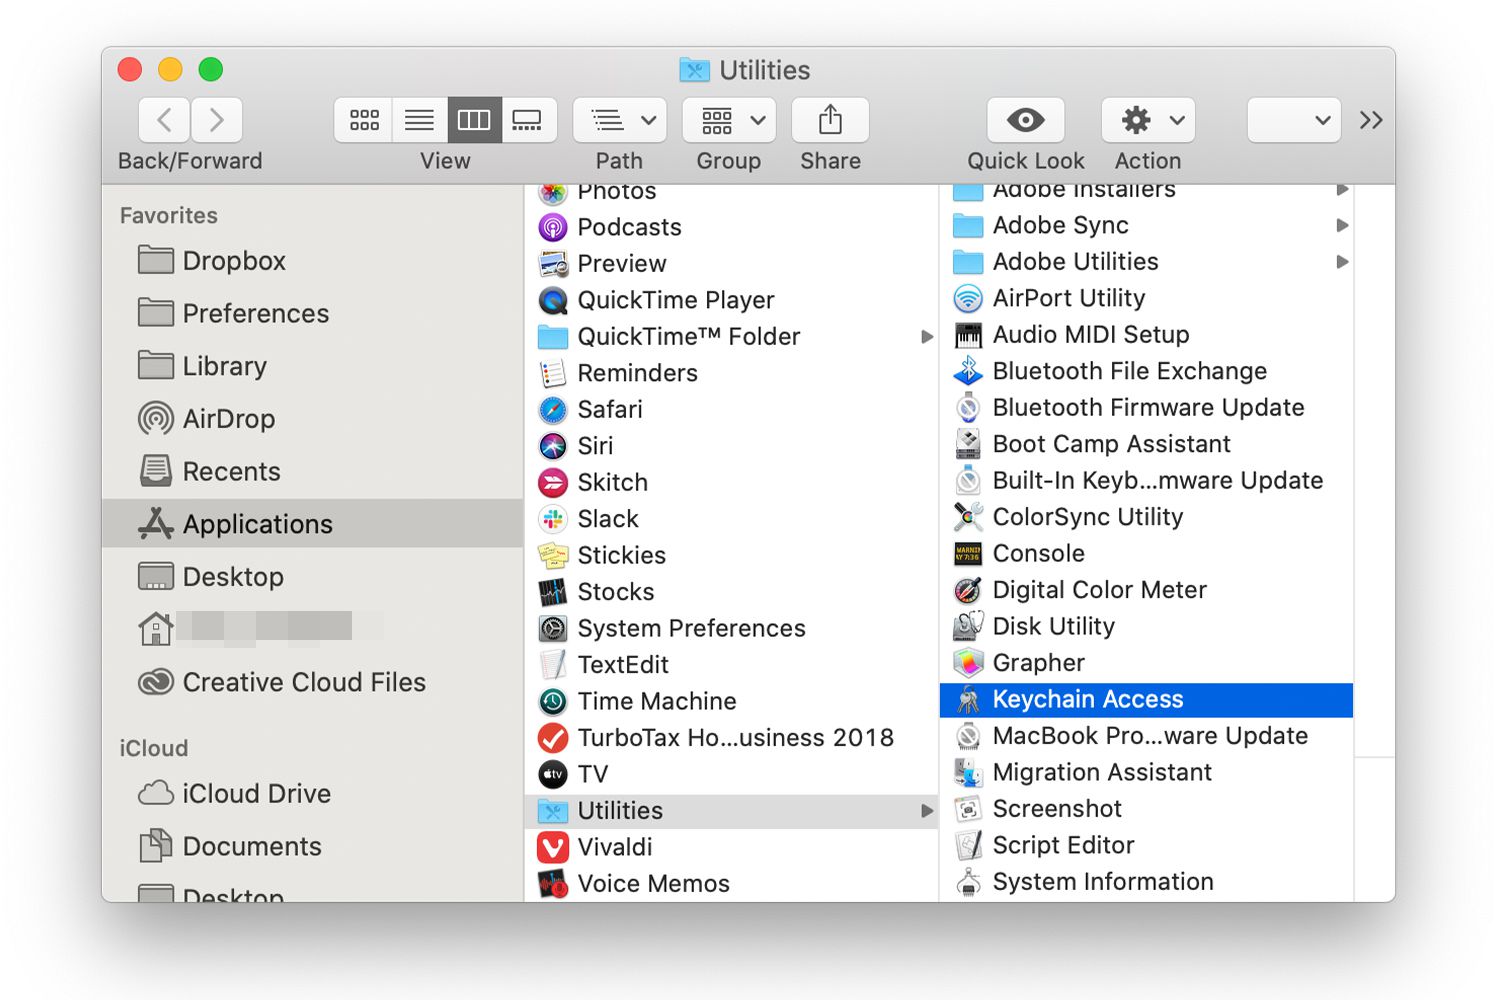 mac email client for exchange